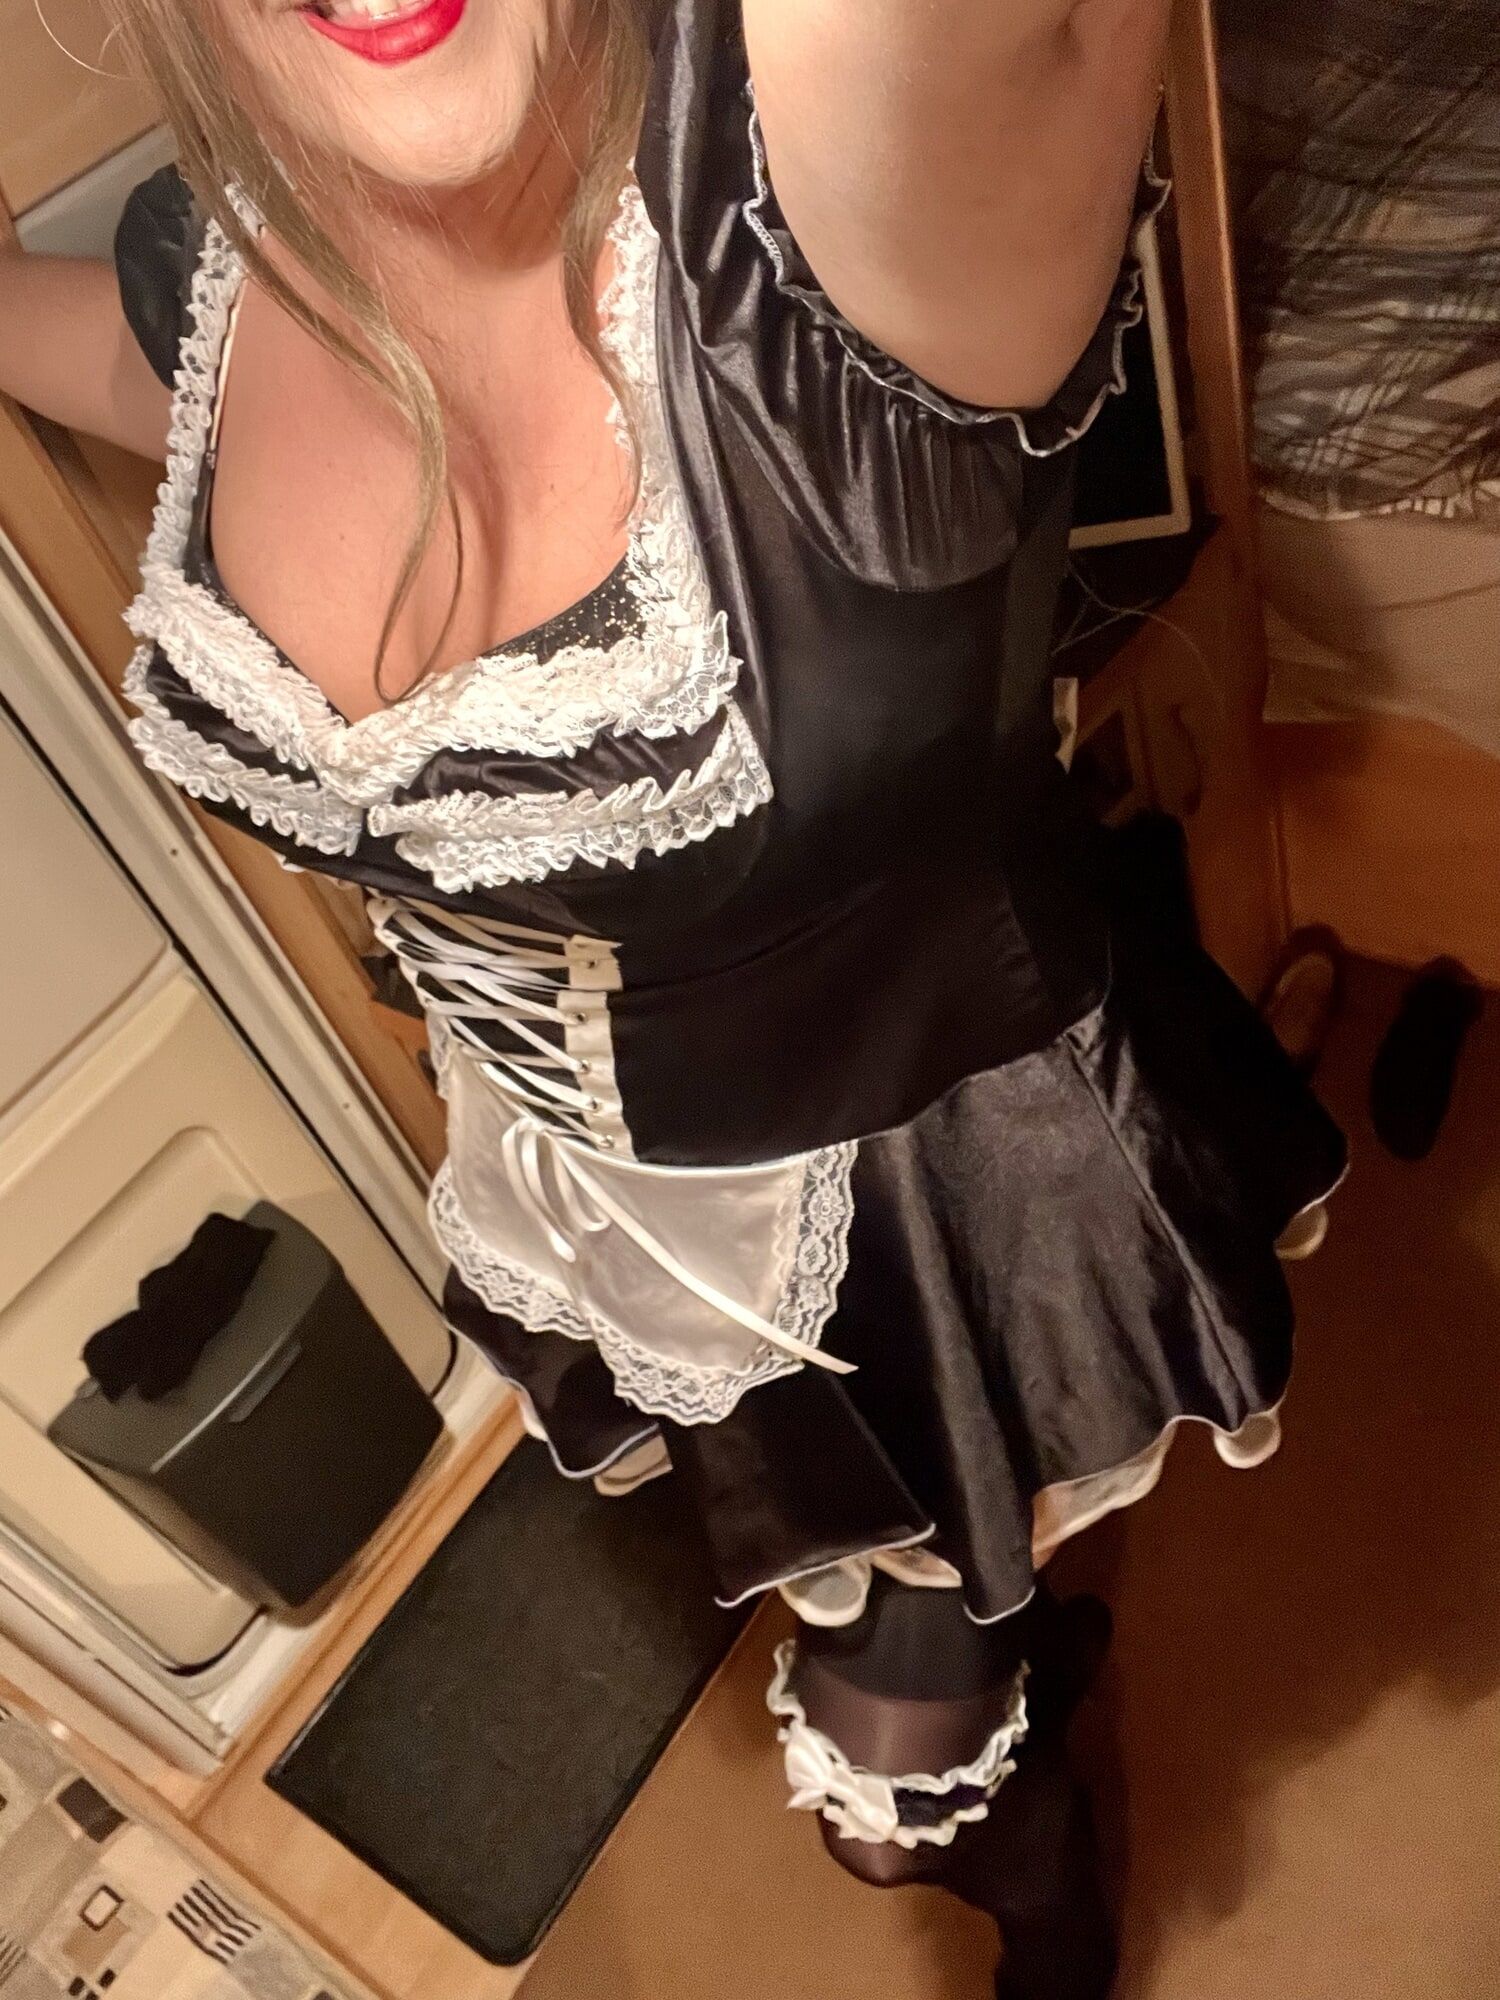 Sissy french maid outfit #10